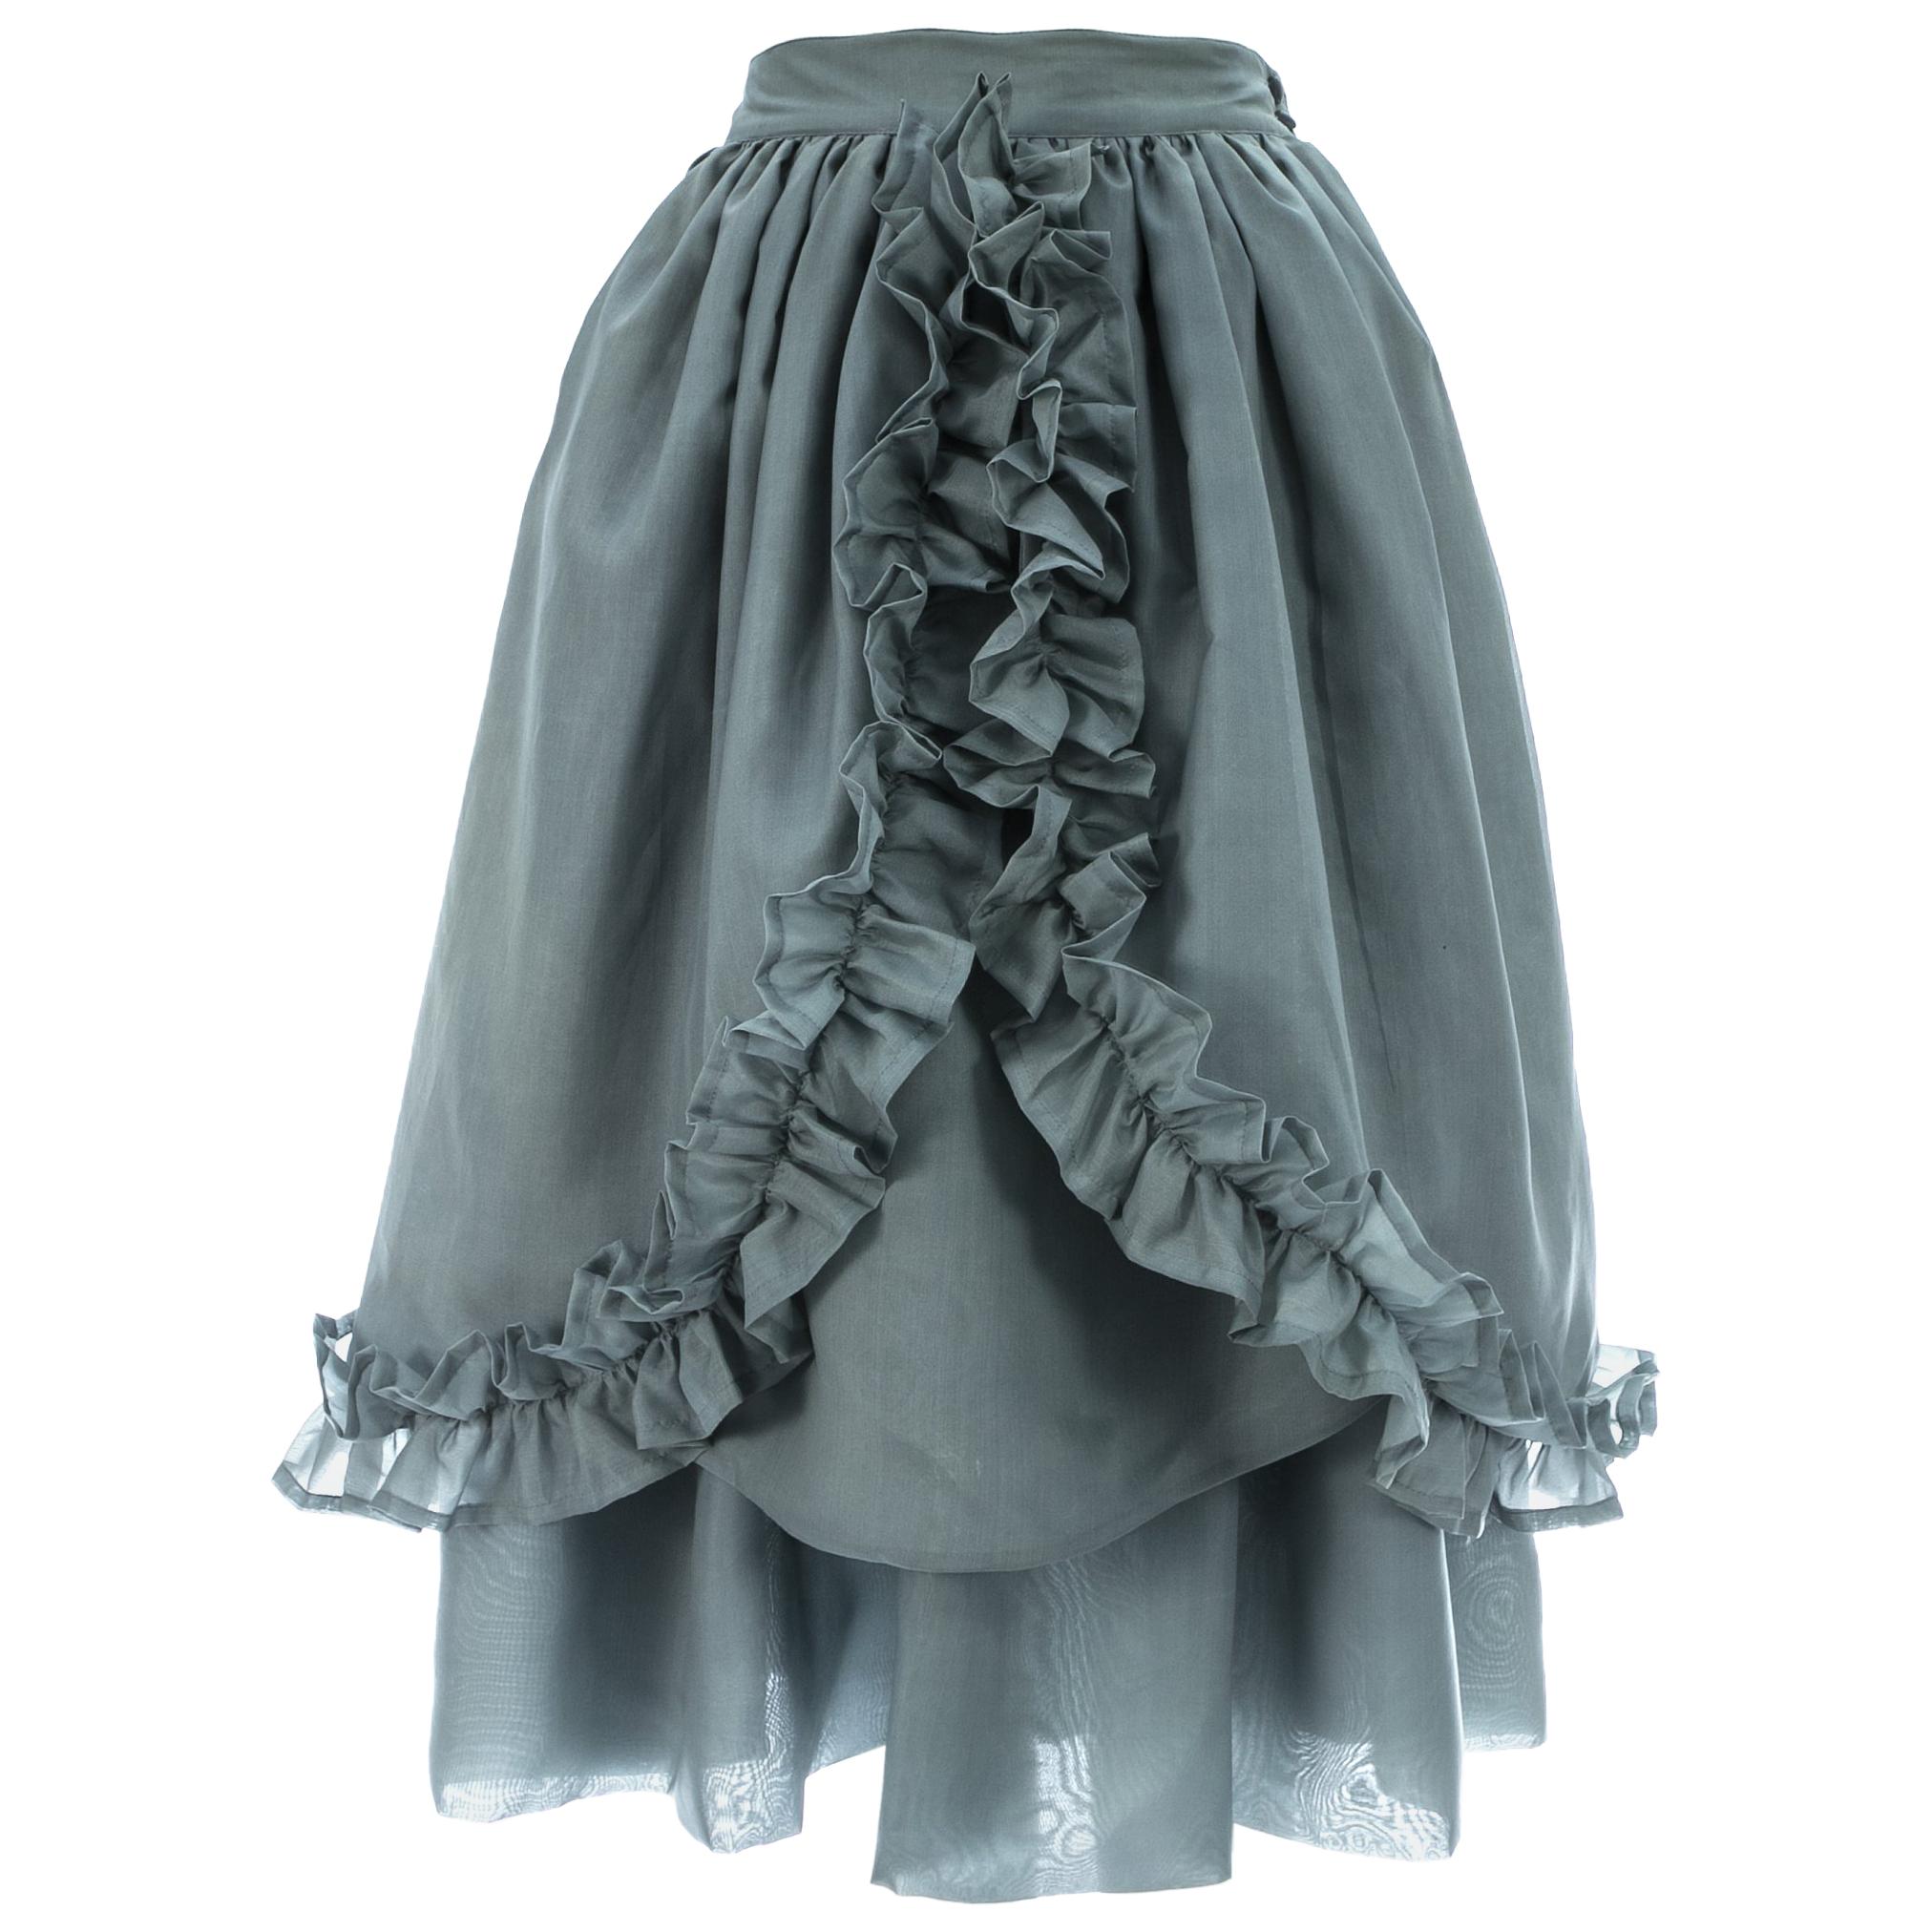 Dolce & Gabbana mint organza bustle skirt with ruffle trim, c. 1980s For Sale